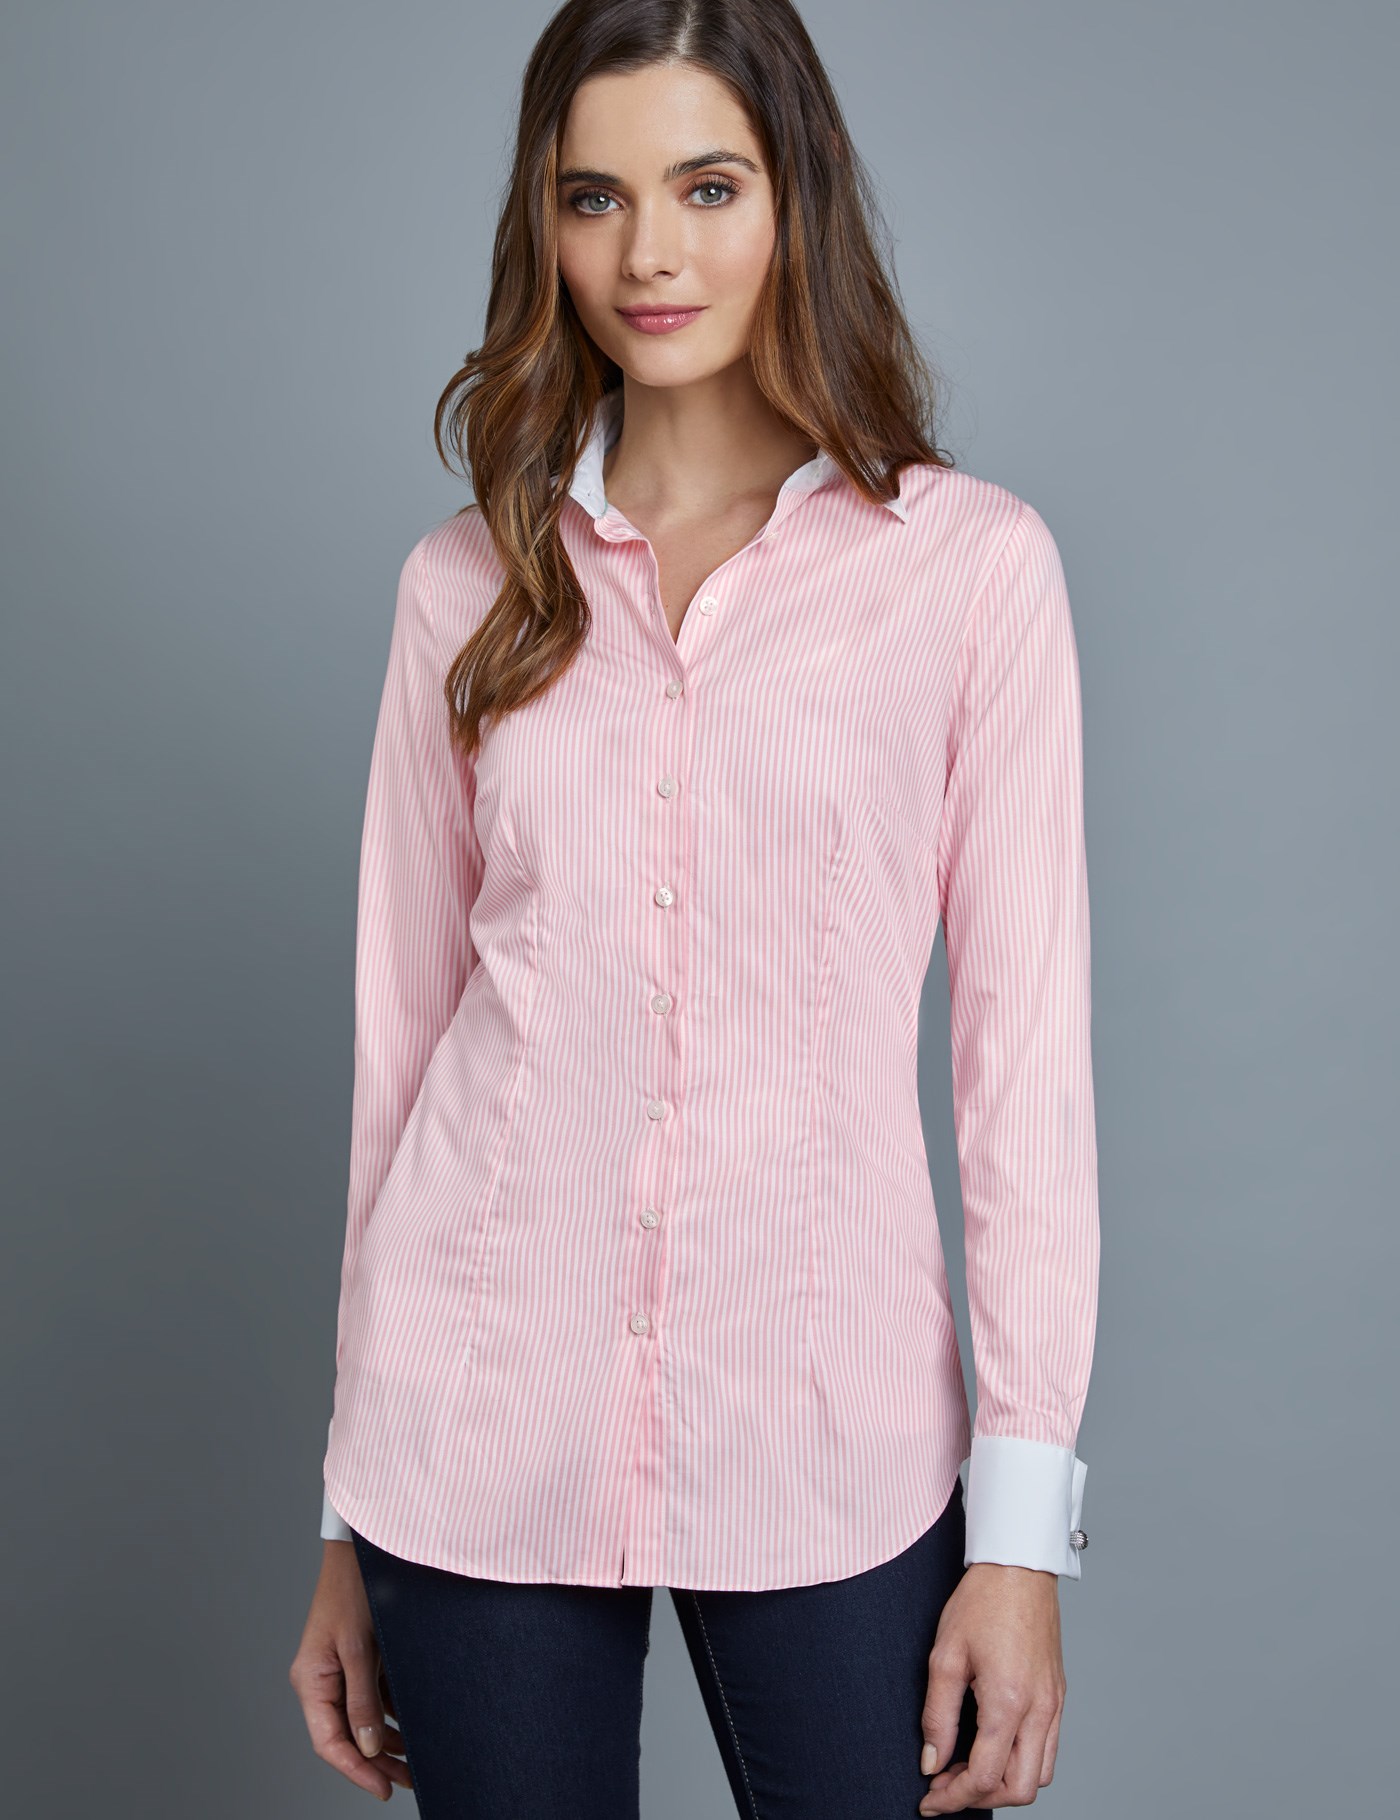 Women's Light Pink & White Bengal Stripe Fitted Executive Shirt ...